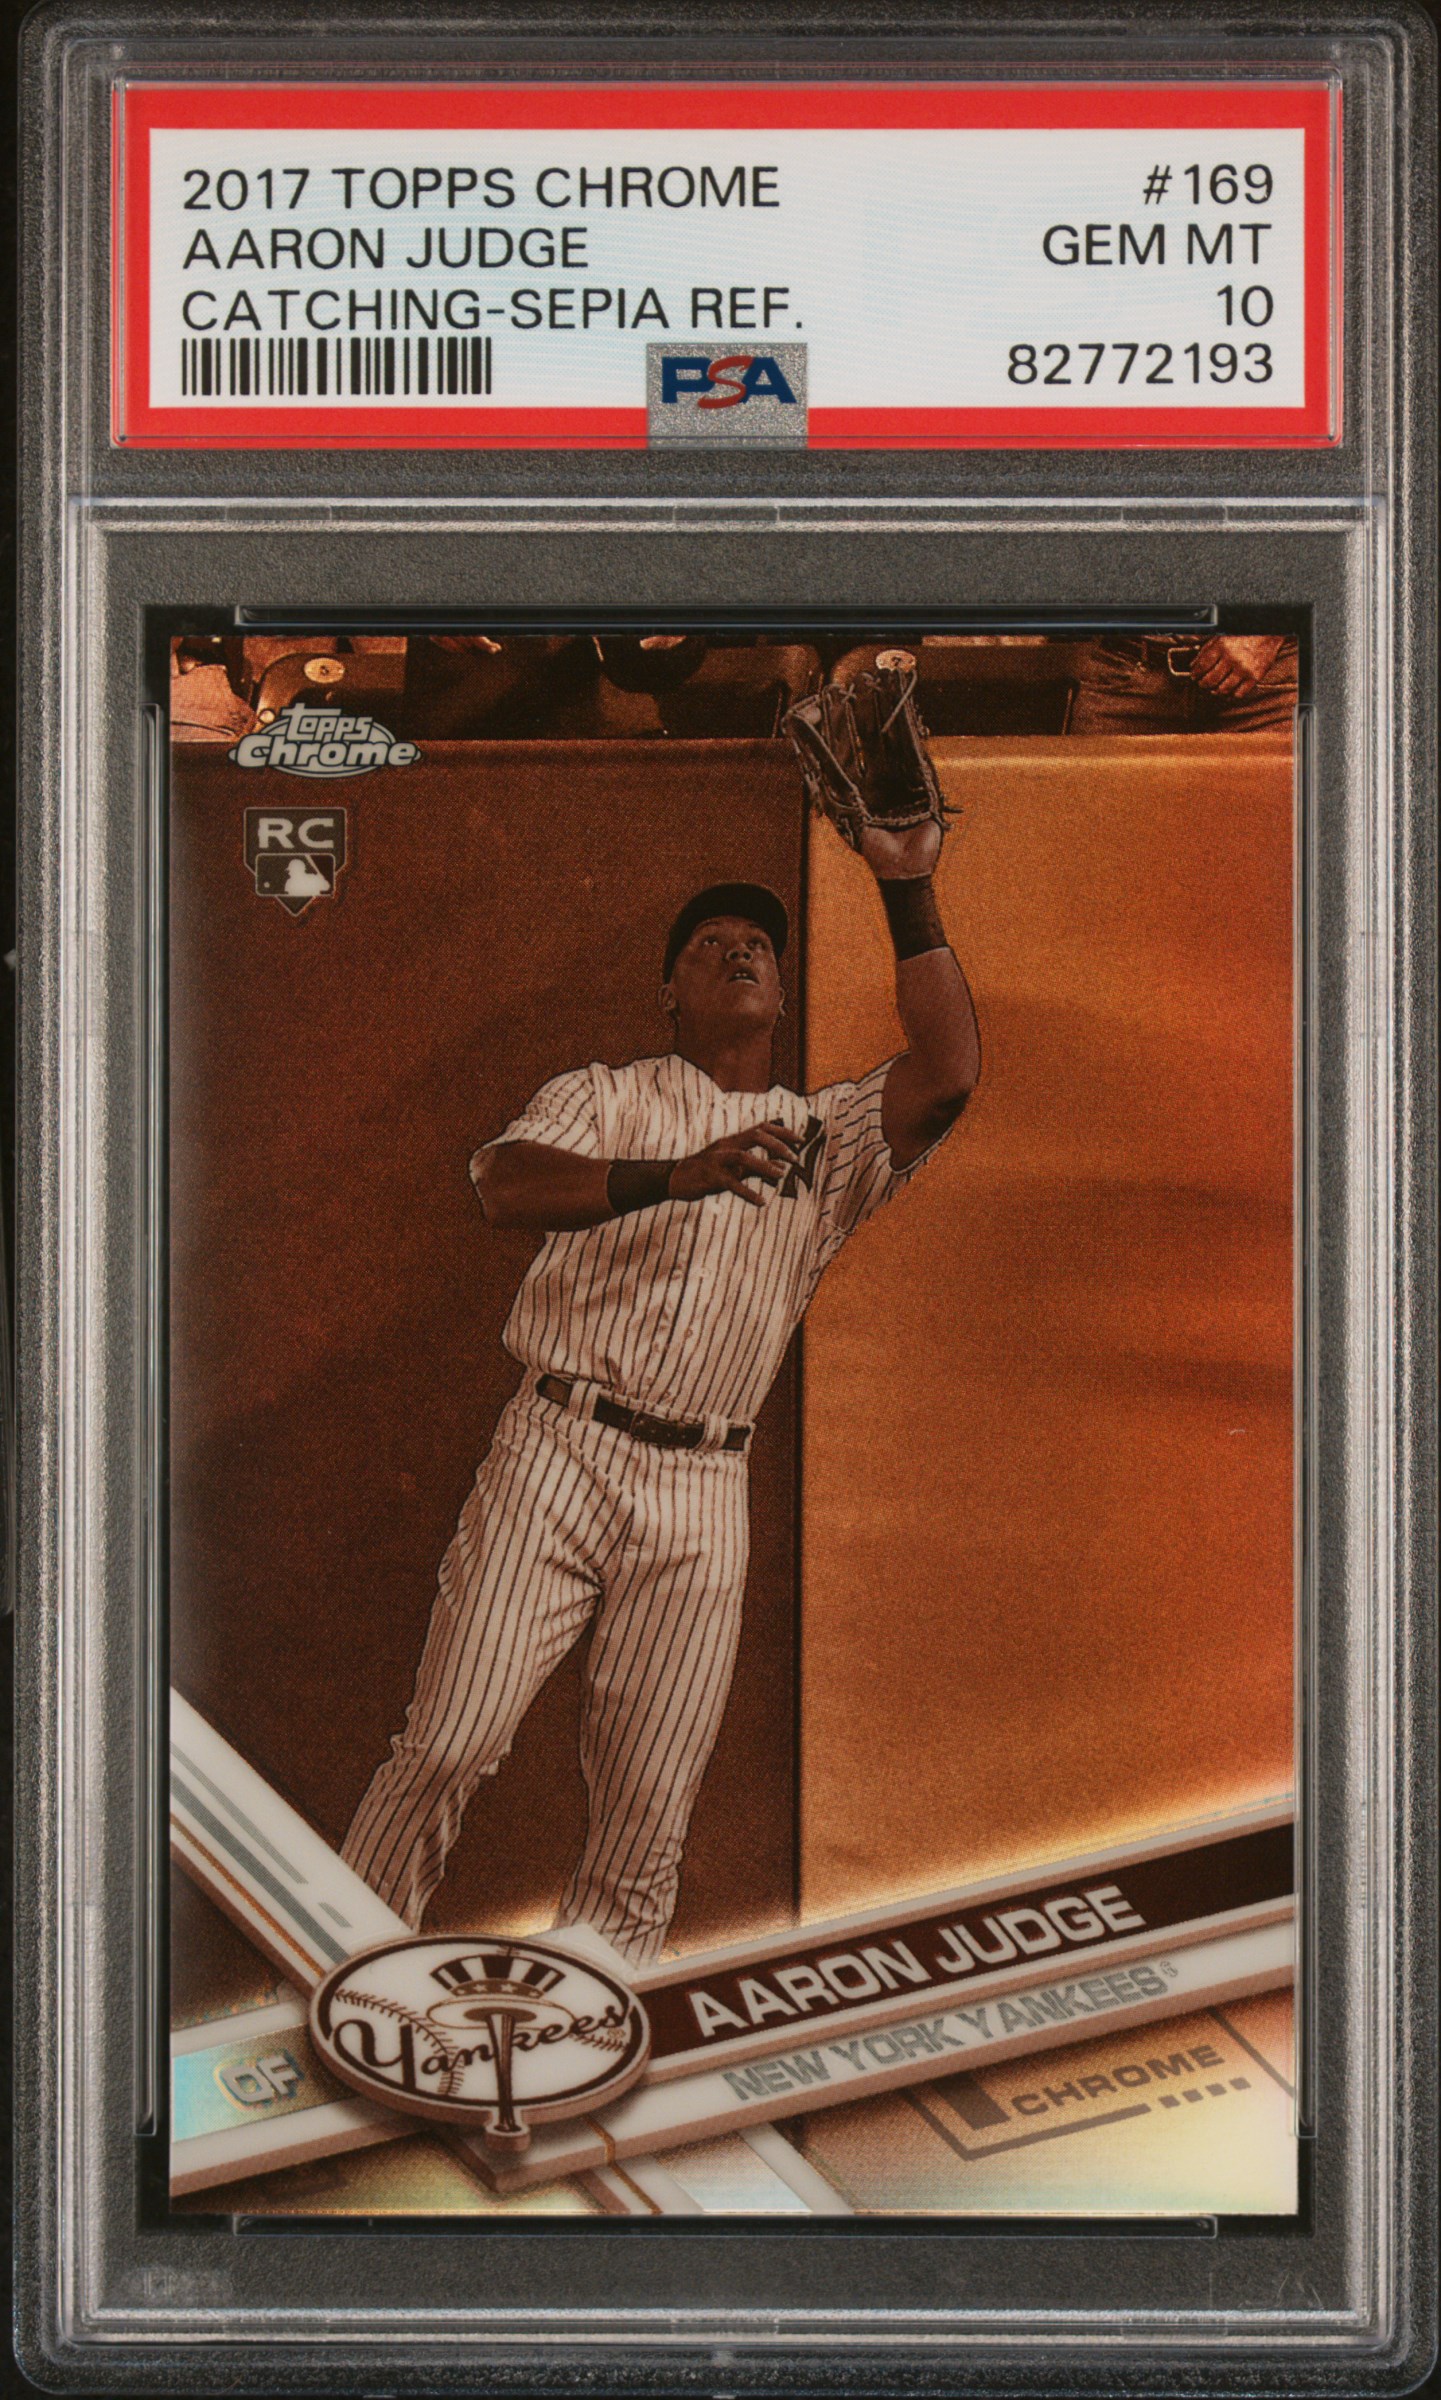 2017 Topps Chrome Catching-Sepia Refractor #169 Aaron Judge Rookie Card – PSA GEM MT 10